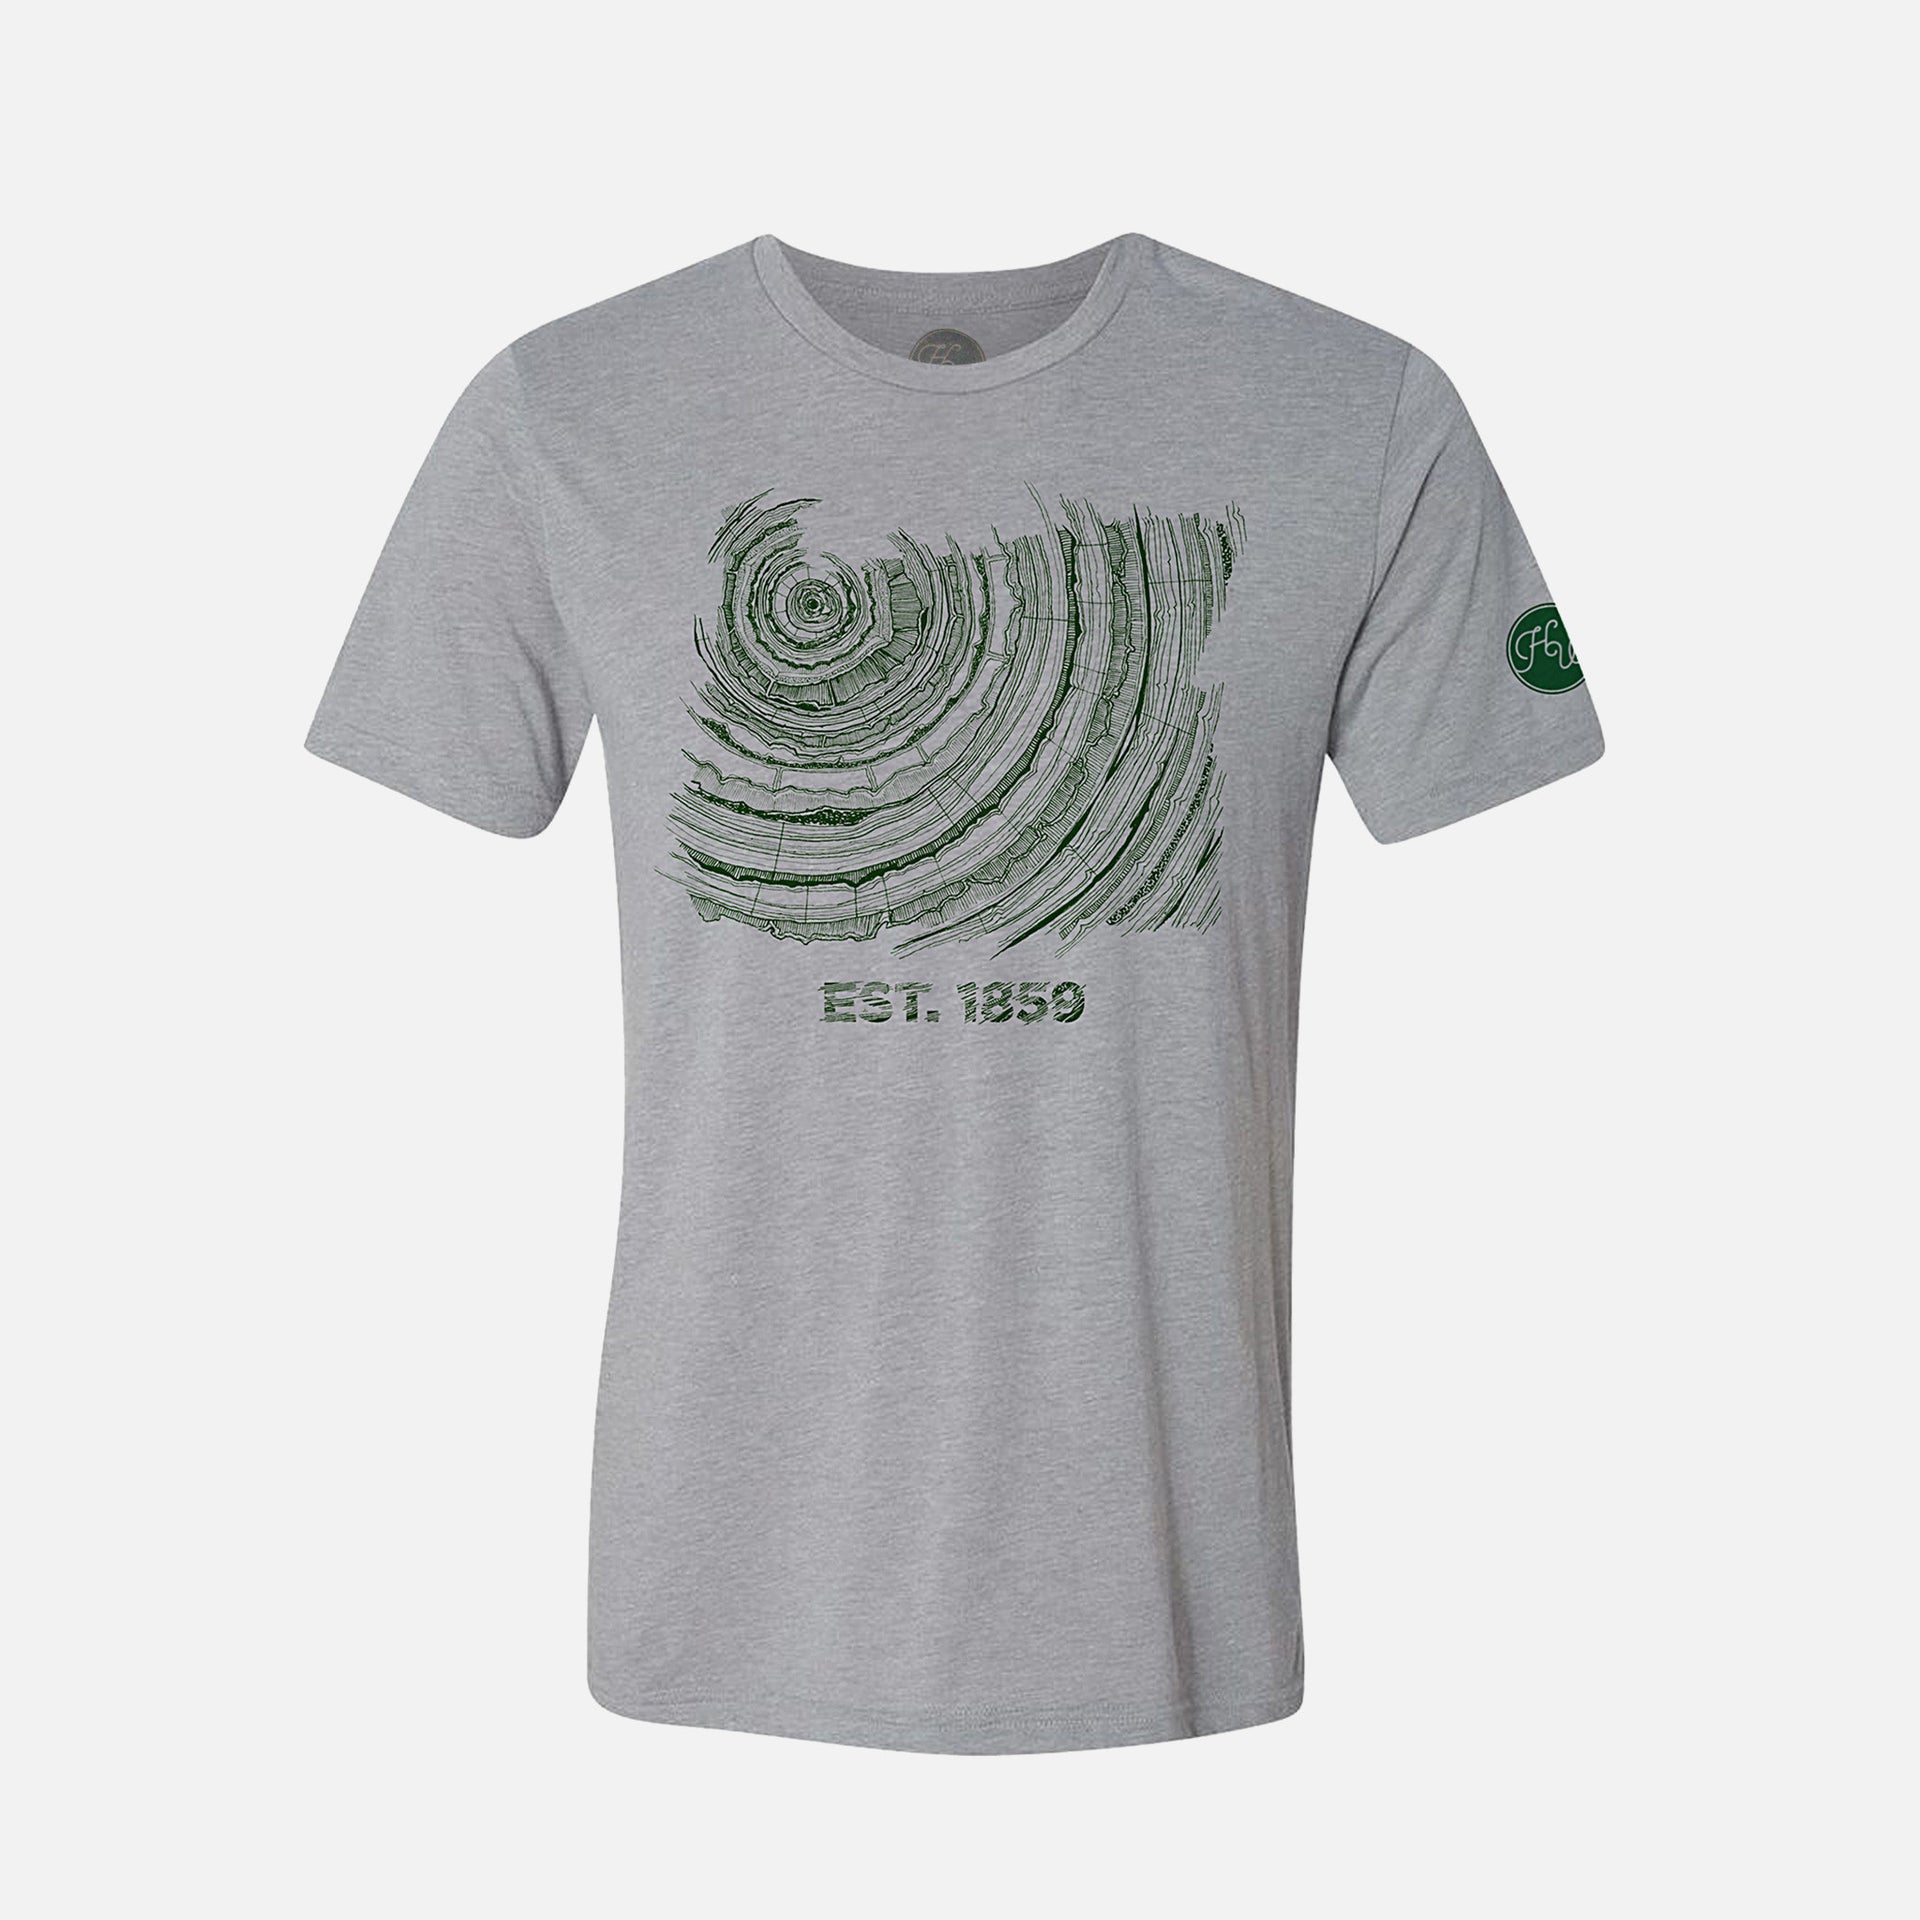 Oregon Tree Rings Hipster Shirt Since 1859